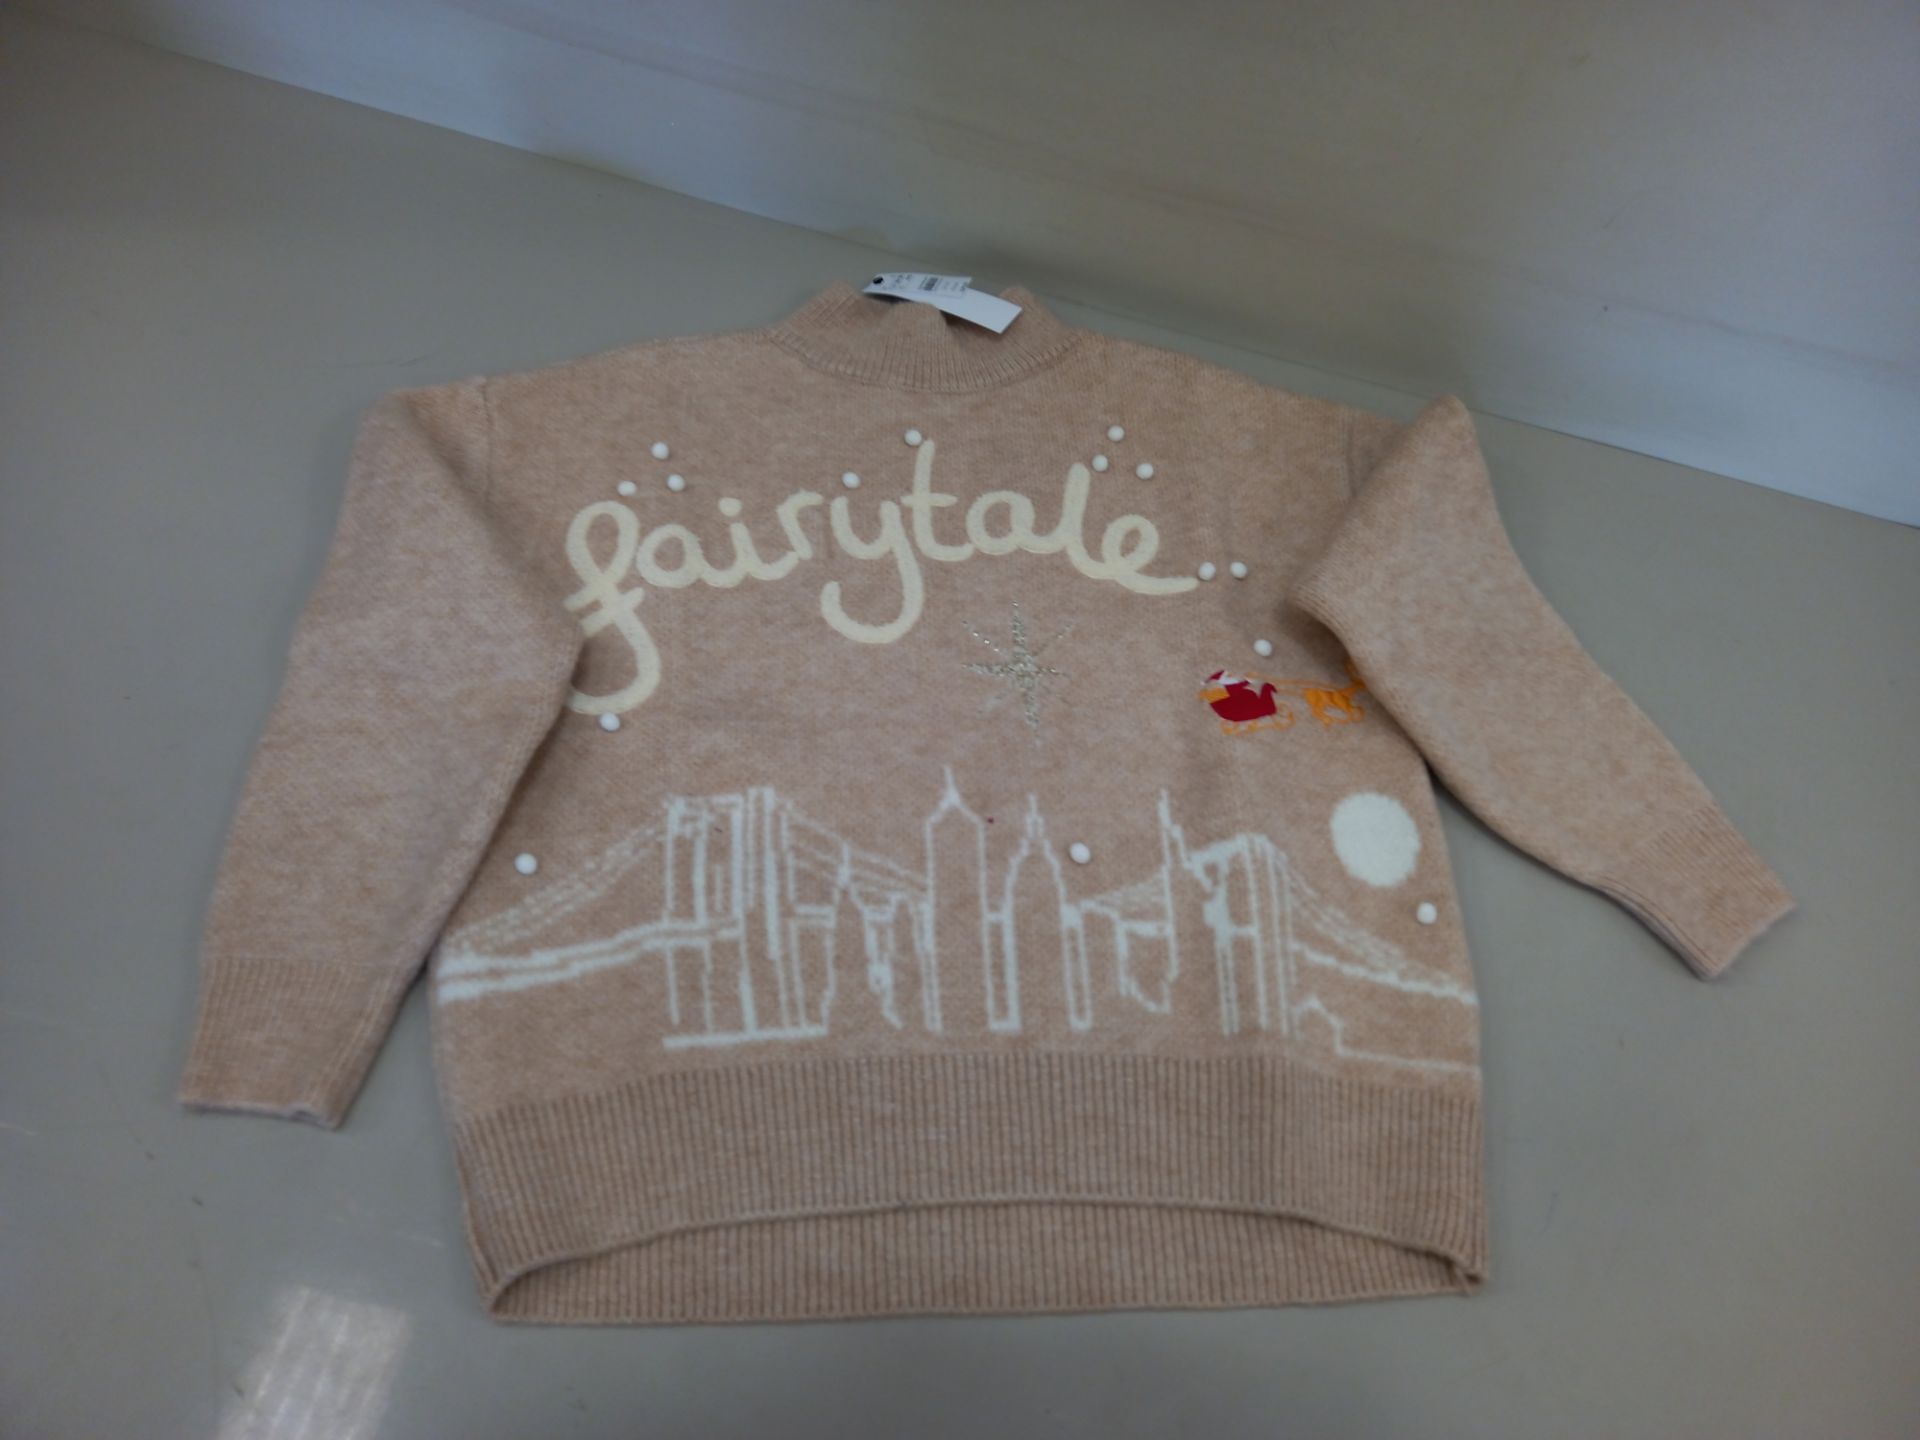 10 X BRAND NEW TOPSHOP FAIRYTALE JUMPERS - 4 X SIZE LARGE, 4 X SIZE MEDIUM AND 2 X EXTRA SMALL